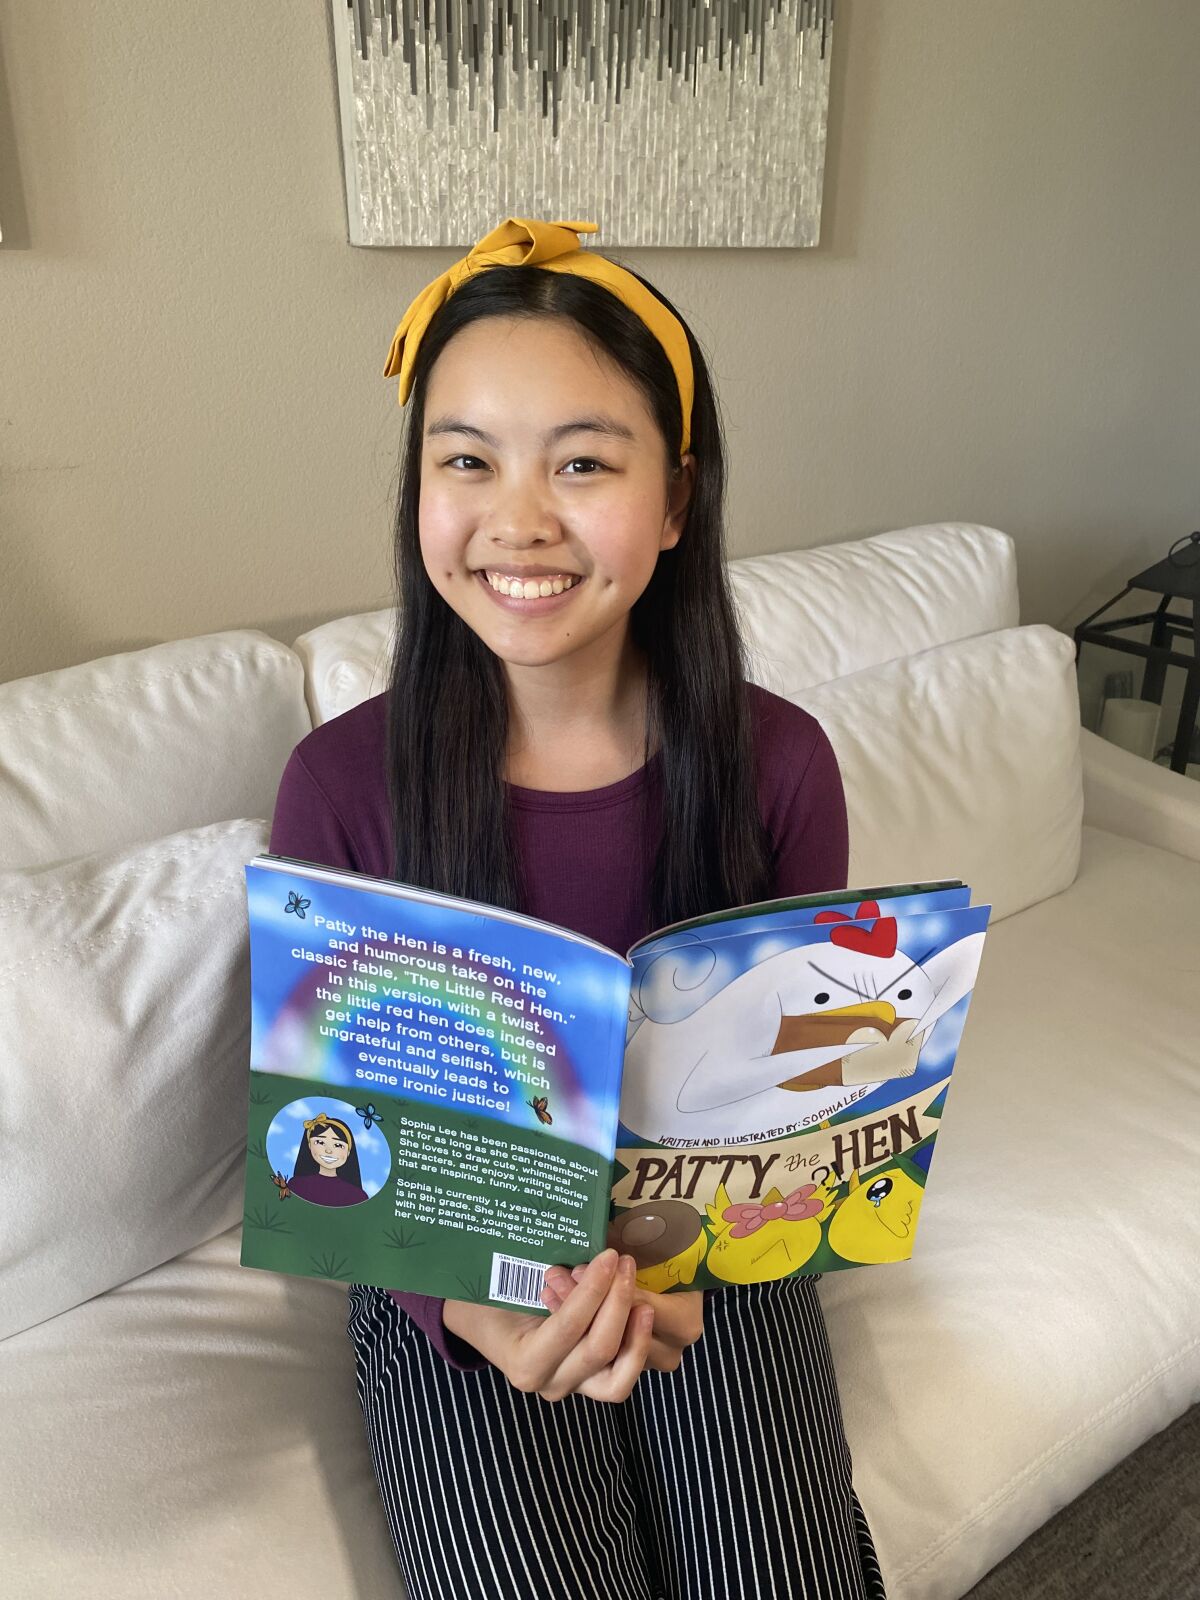 Sophia Lee recently published a children's book called "Patty the Hen."